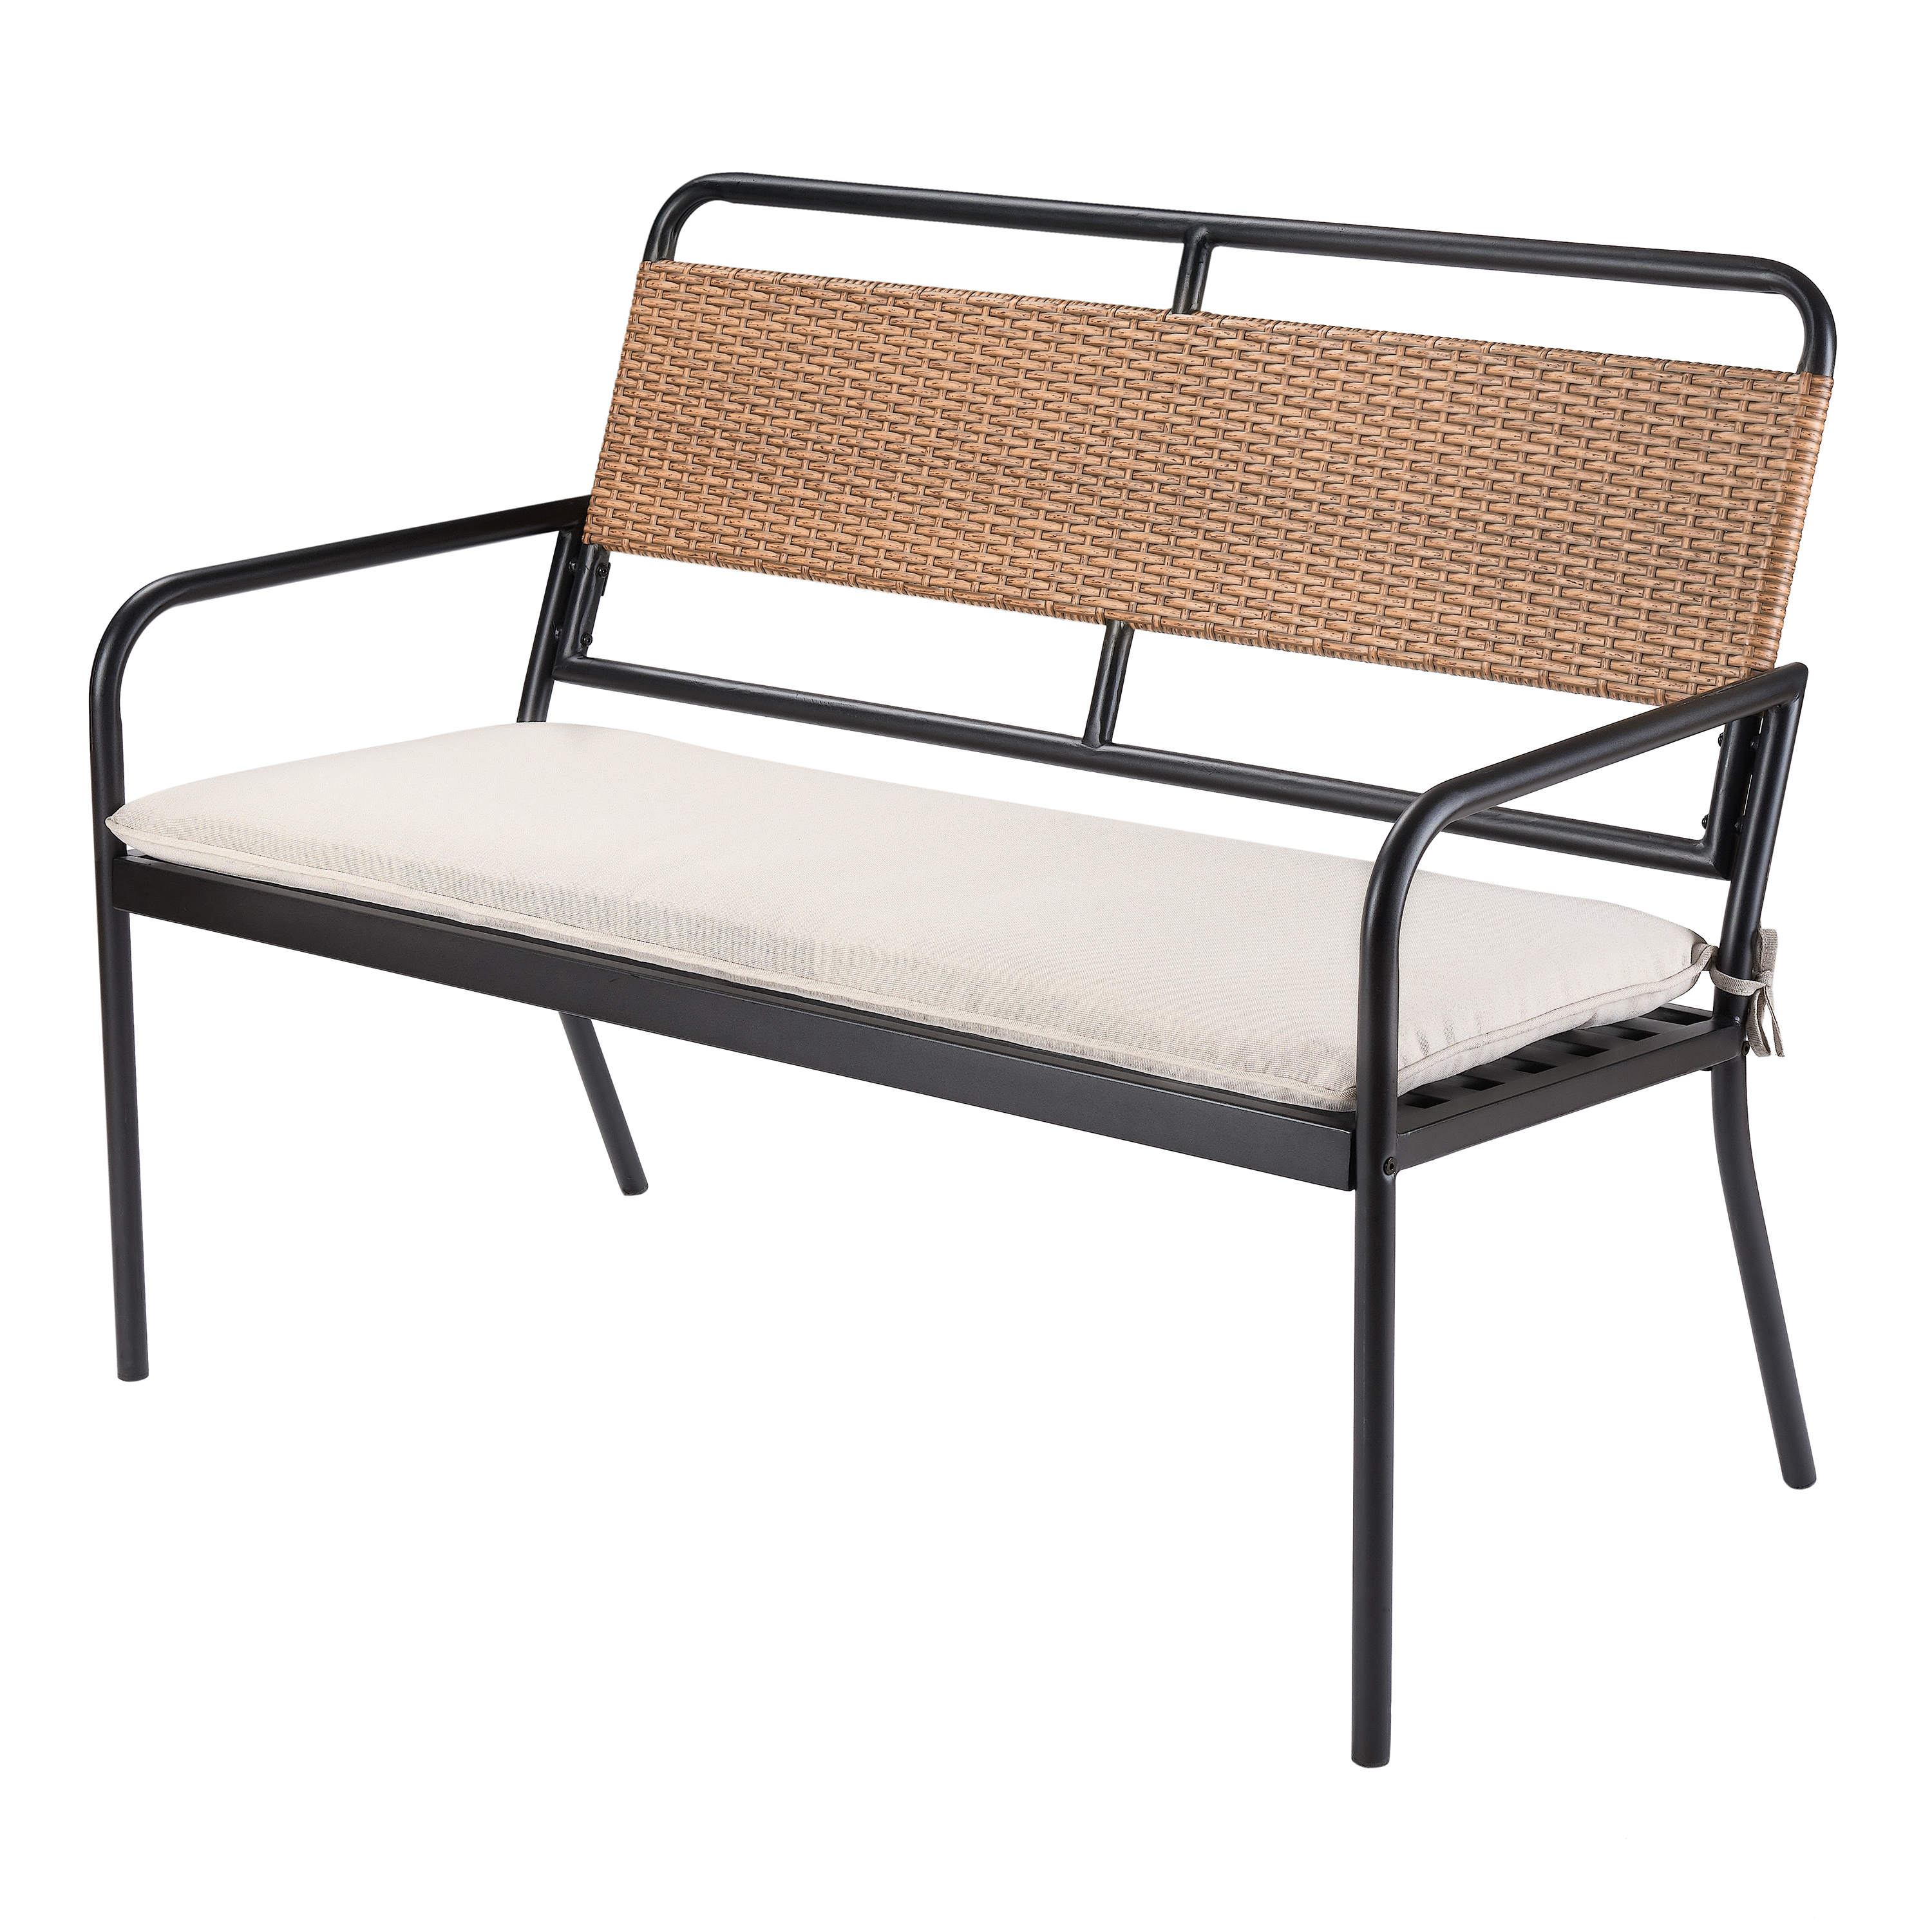 Mainstays Holcomb Outdoor Metal and Wicker Bench - image 3 of 4